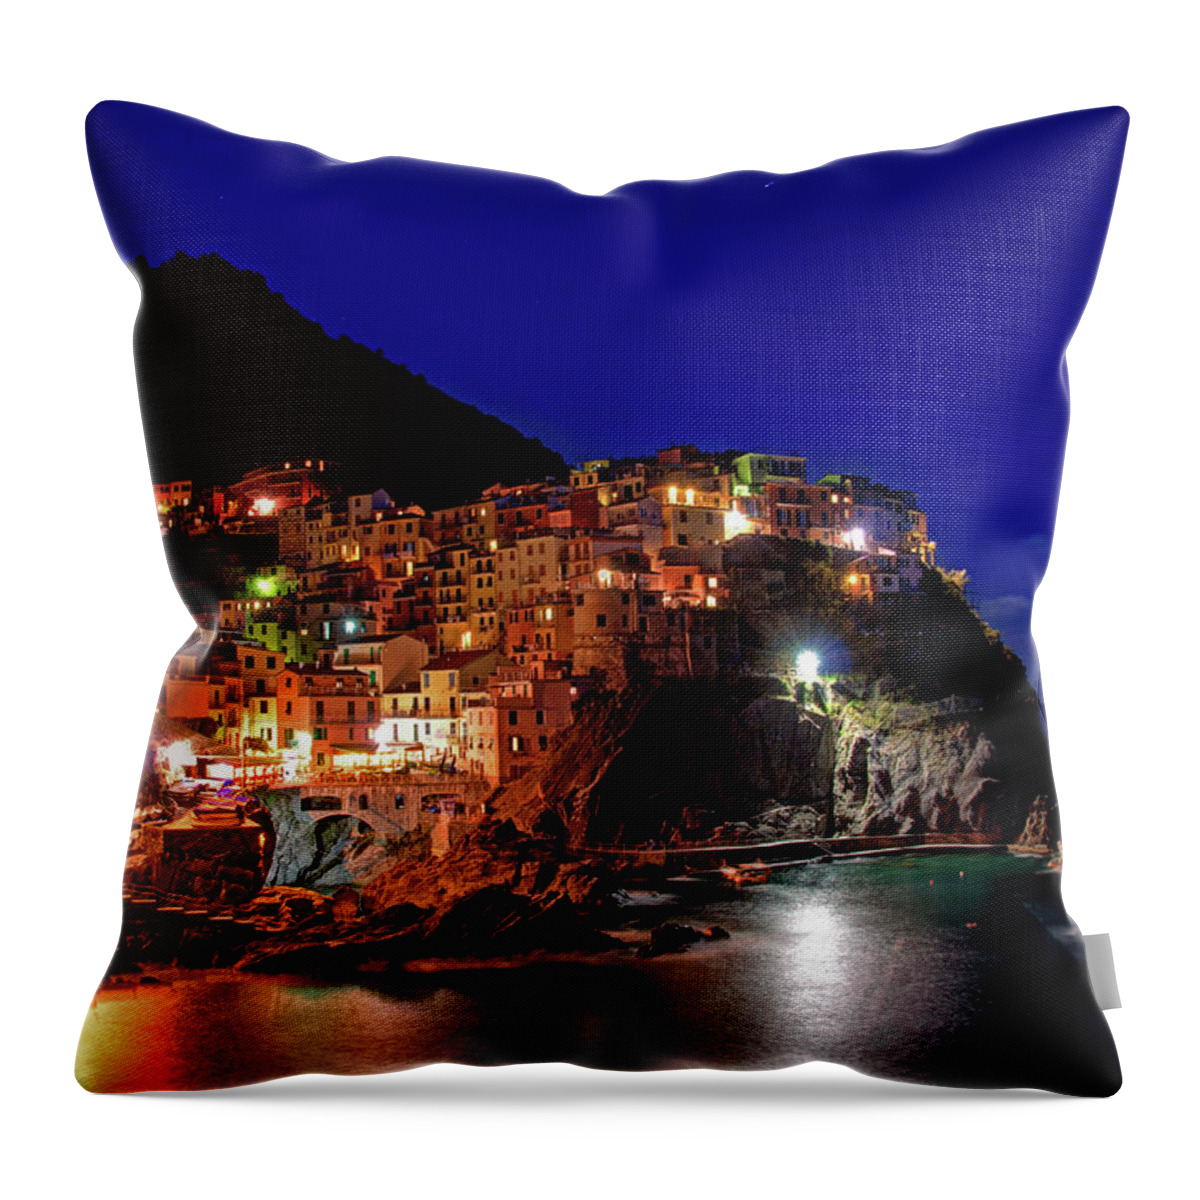 Tranquility Throw Pillow featuring the photograph Manarola Italy, Liguria, Cinque Terre by Photo Art By Mandy